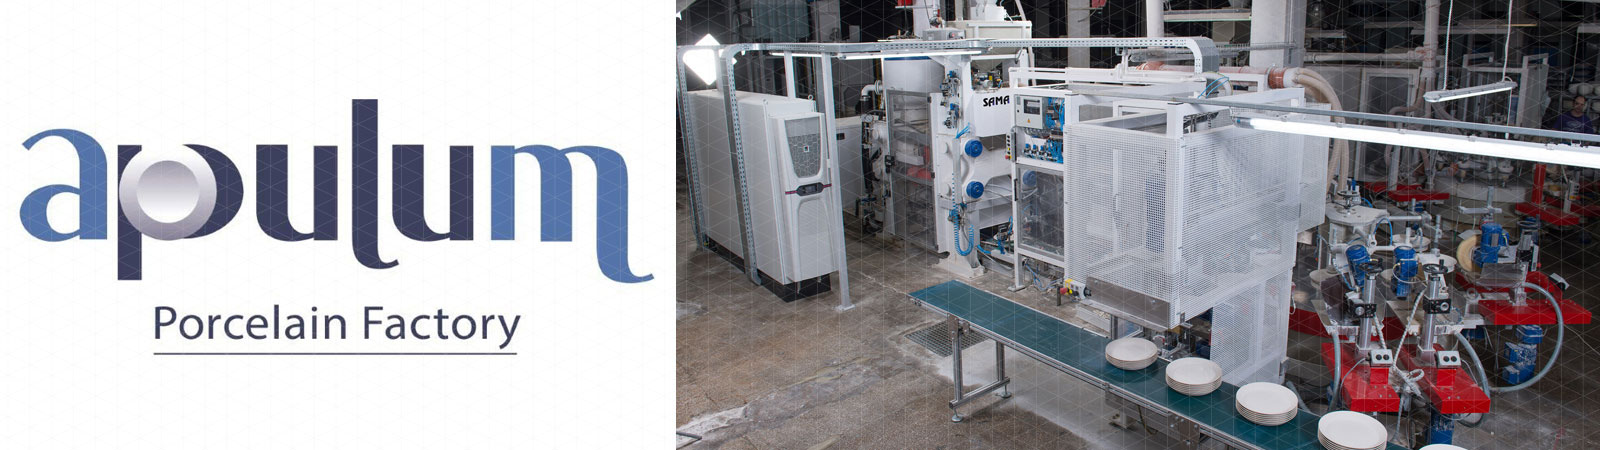 Apulum continues to rely on the quality of SACMI-SAMA technology and customer service